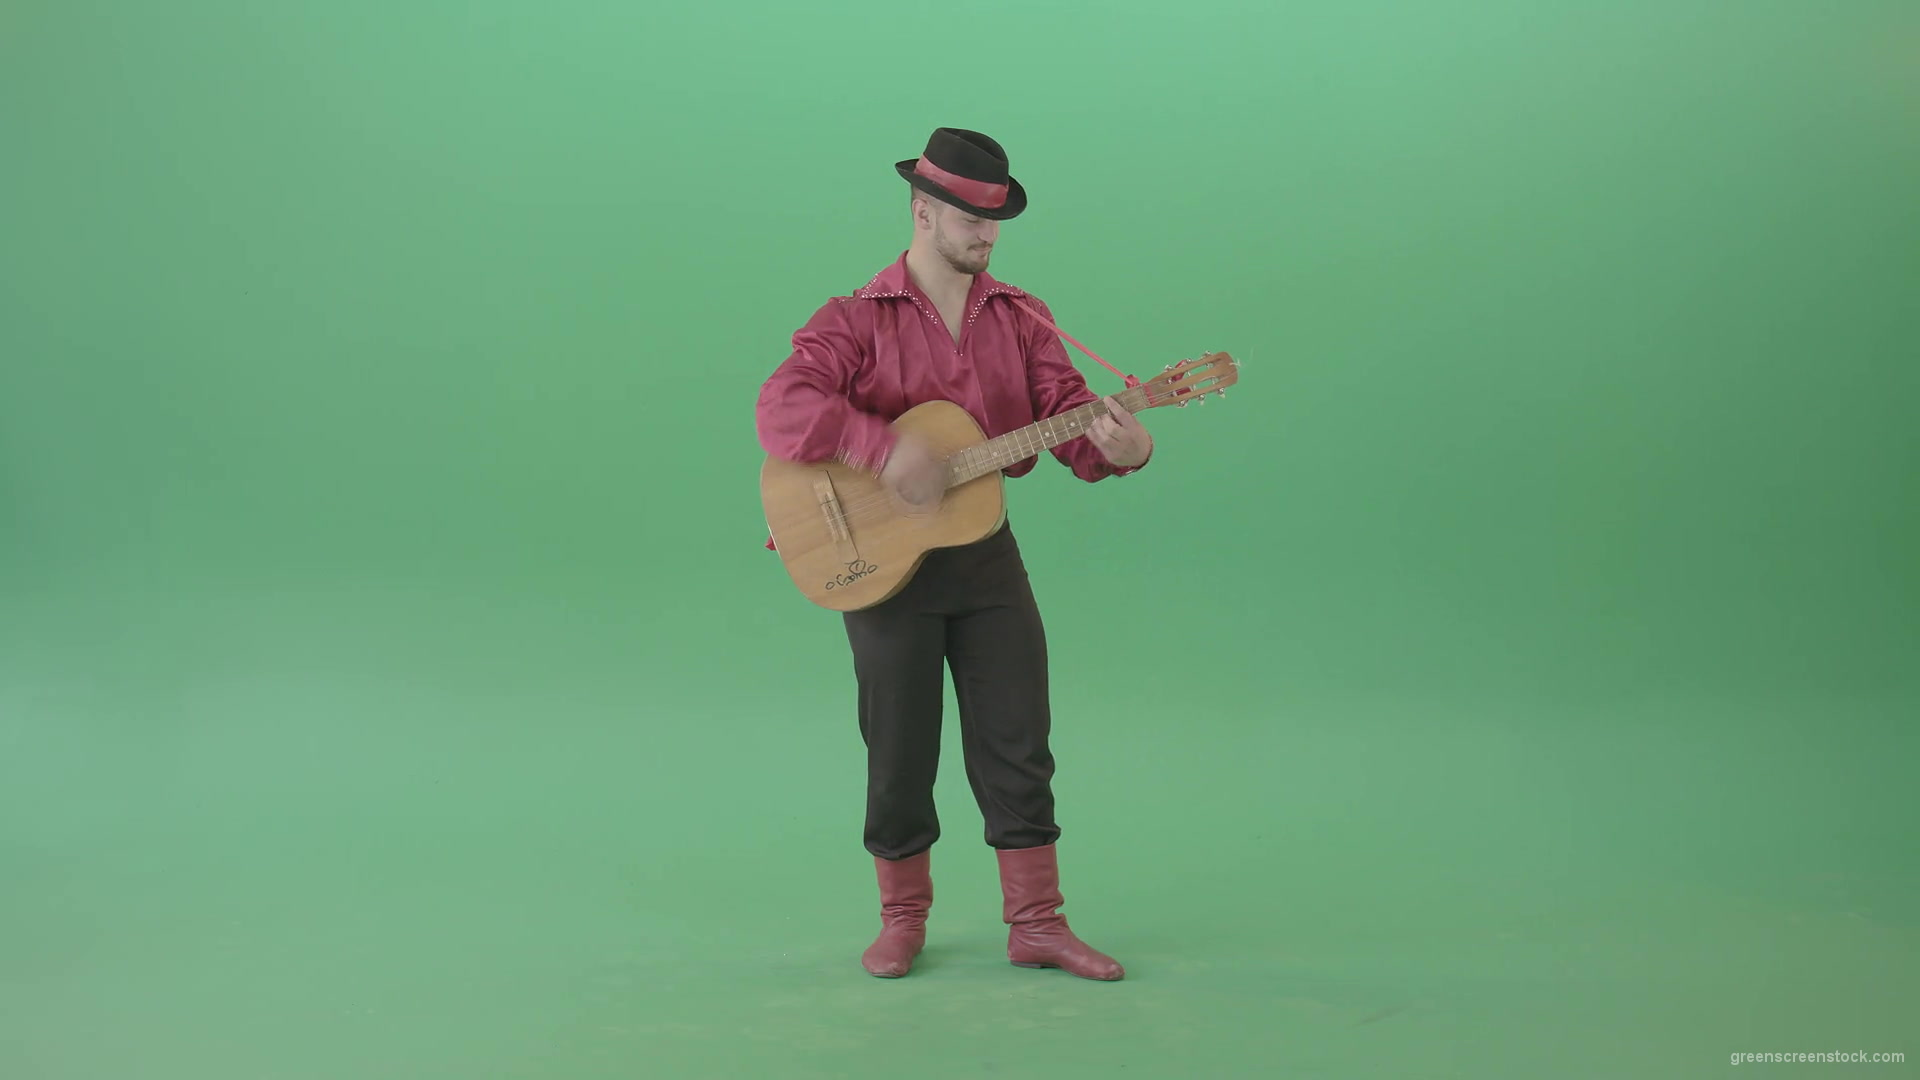 Balkan-Gipsy-man-in-red-shirt-playing-guitar-isolated-on-green-screen-4K-Video-Footage-1920_002 Green Screen Stock